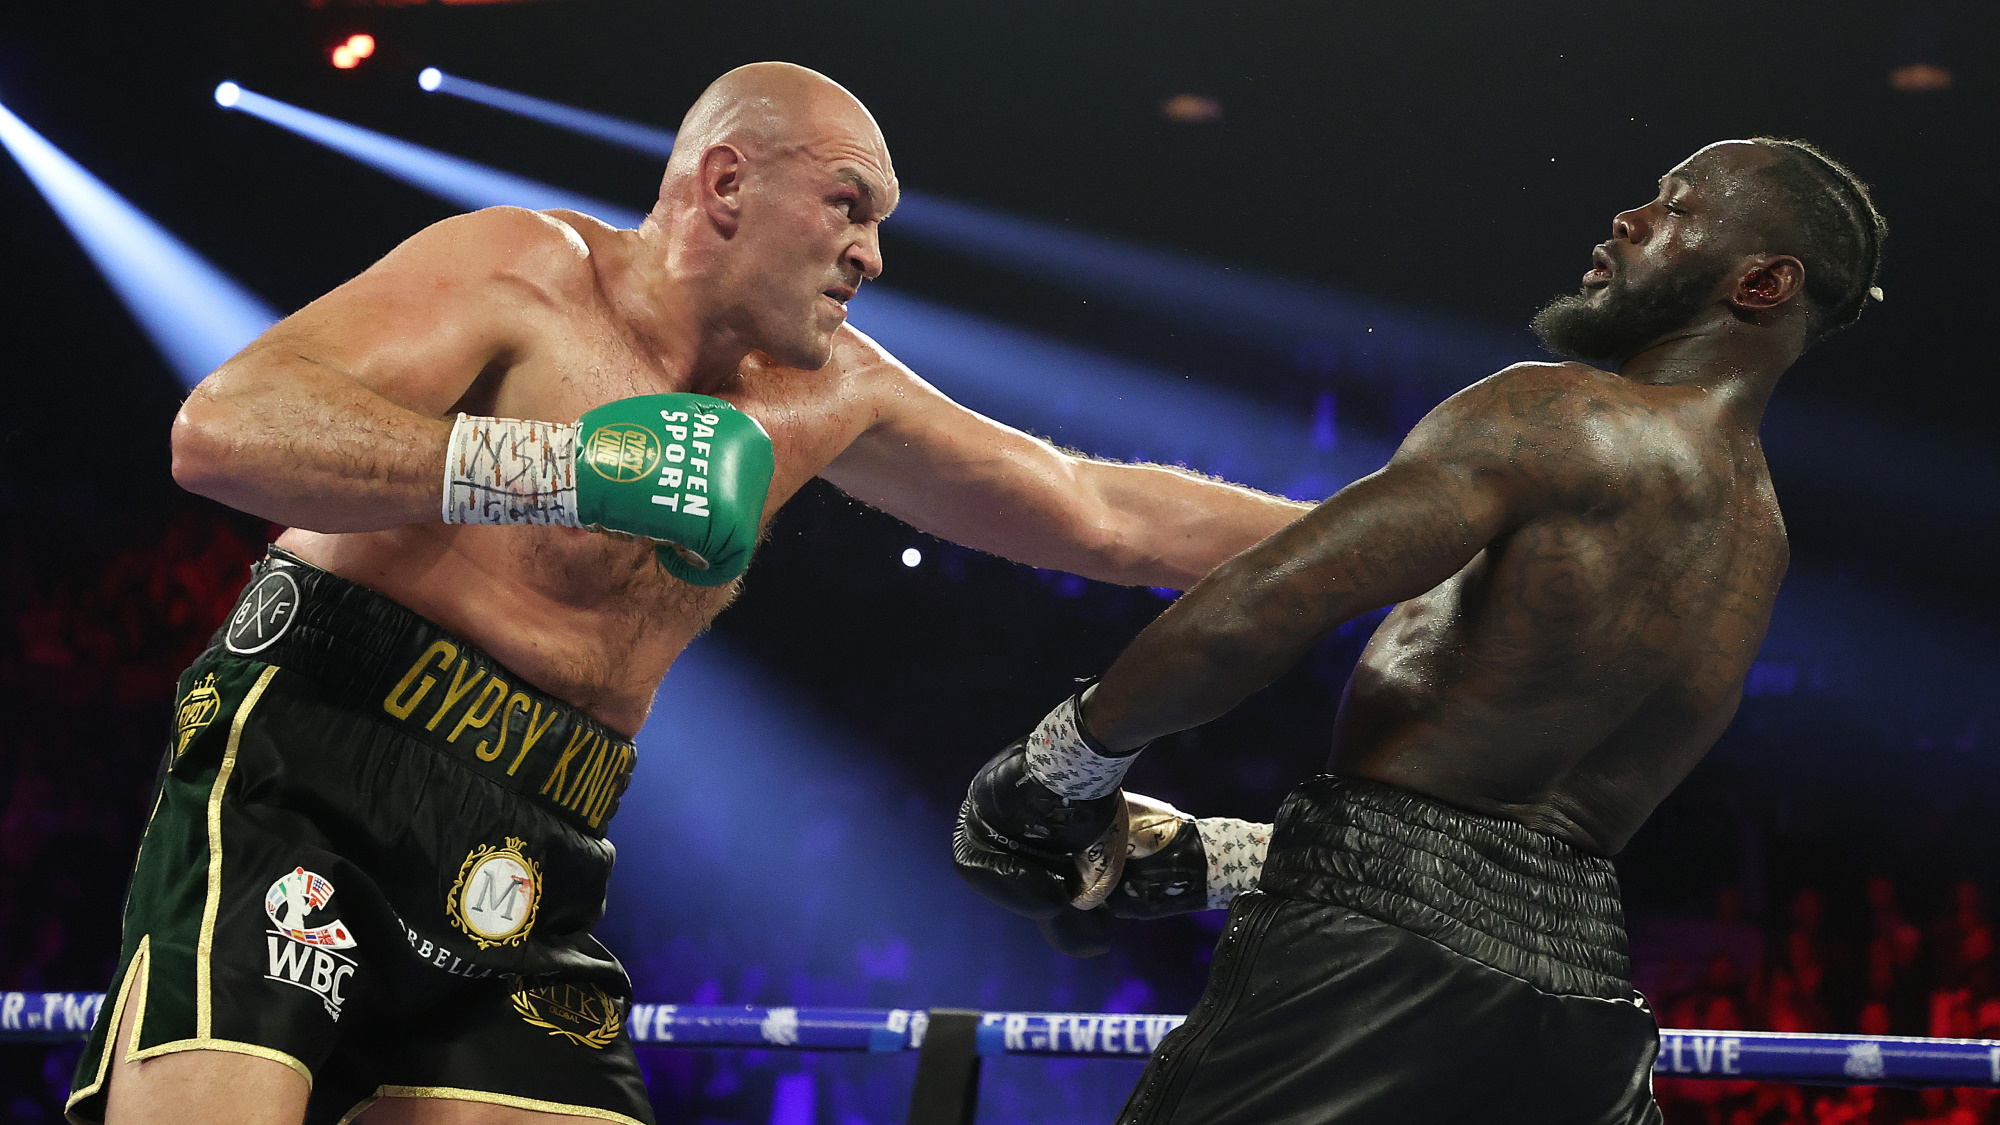 Fury vs Wilder 3 live stream how to watch from anywhere TechRadar